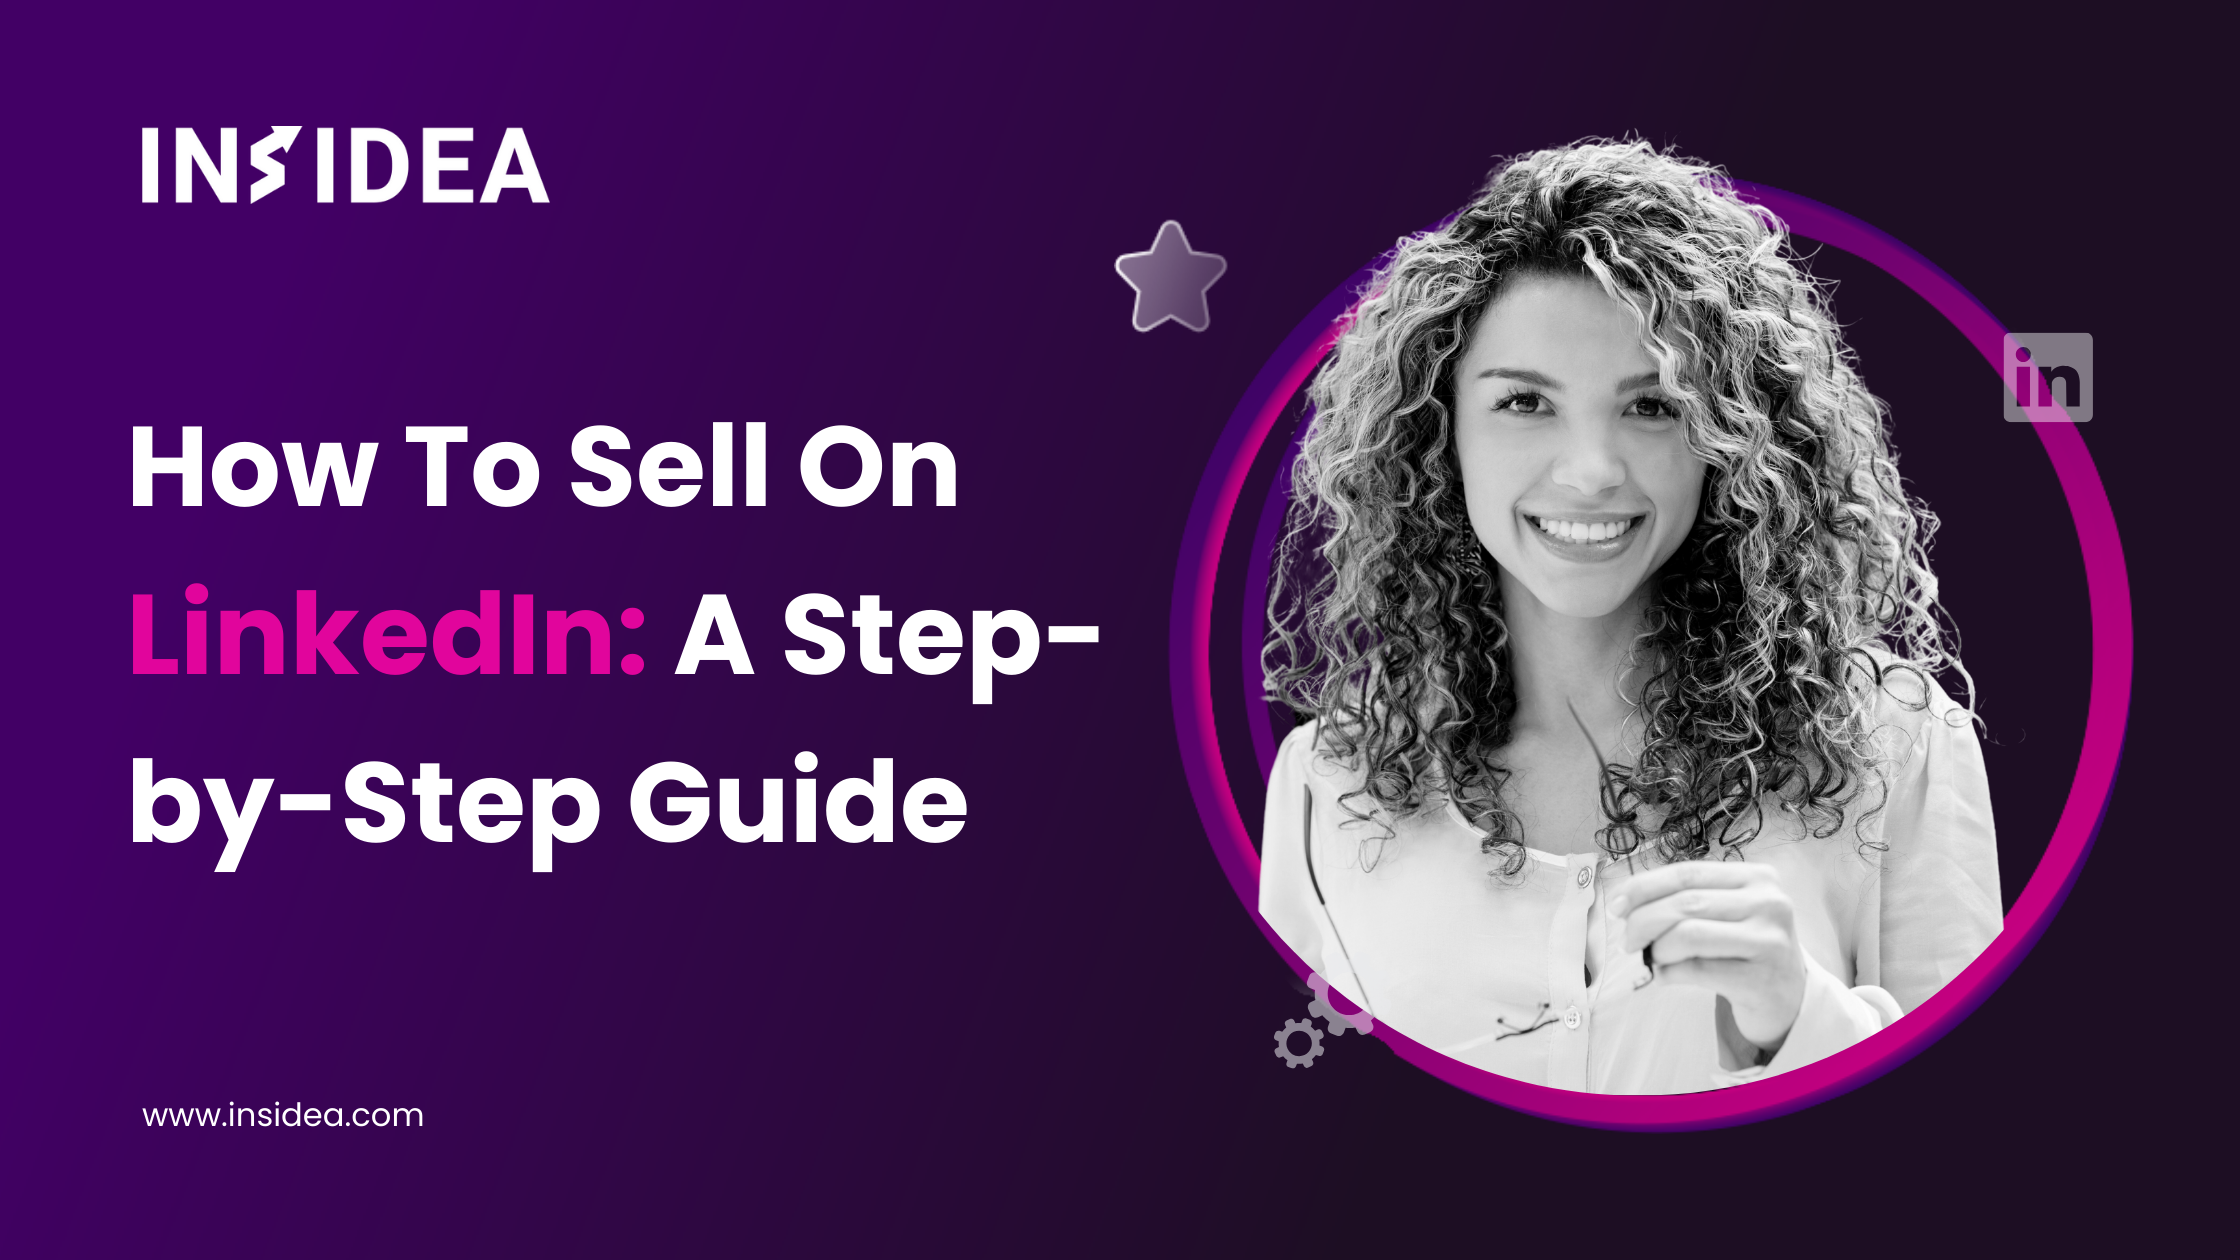 How To Sell On LinkedIn_ A Step-by-Step Guide